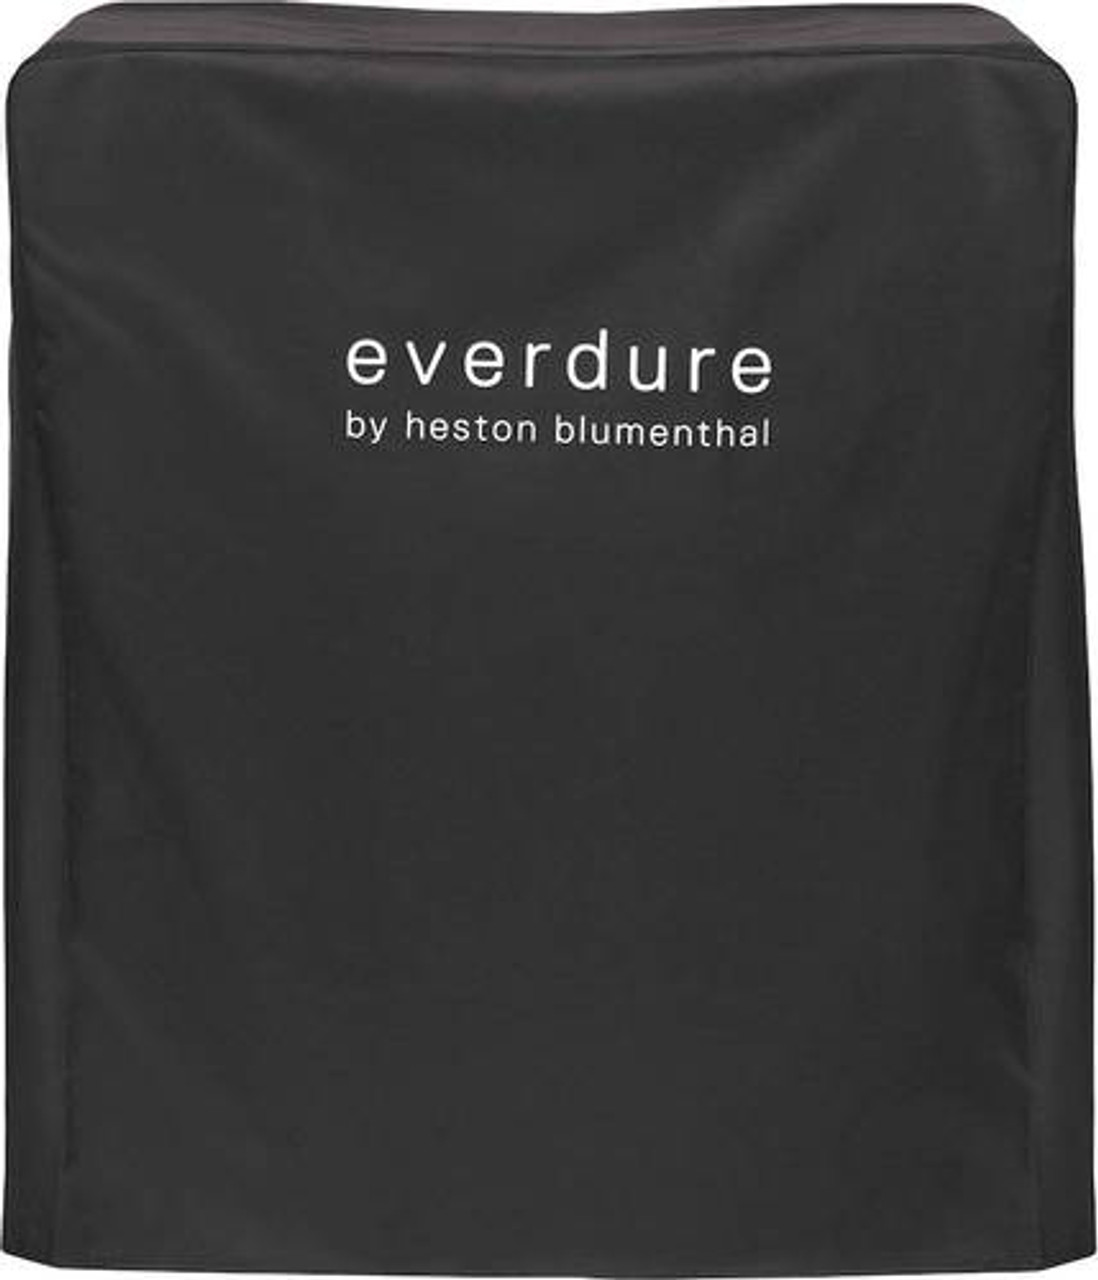 Long Cover for Everdure by Heston Blumenthal FUSION Grills - Black